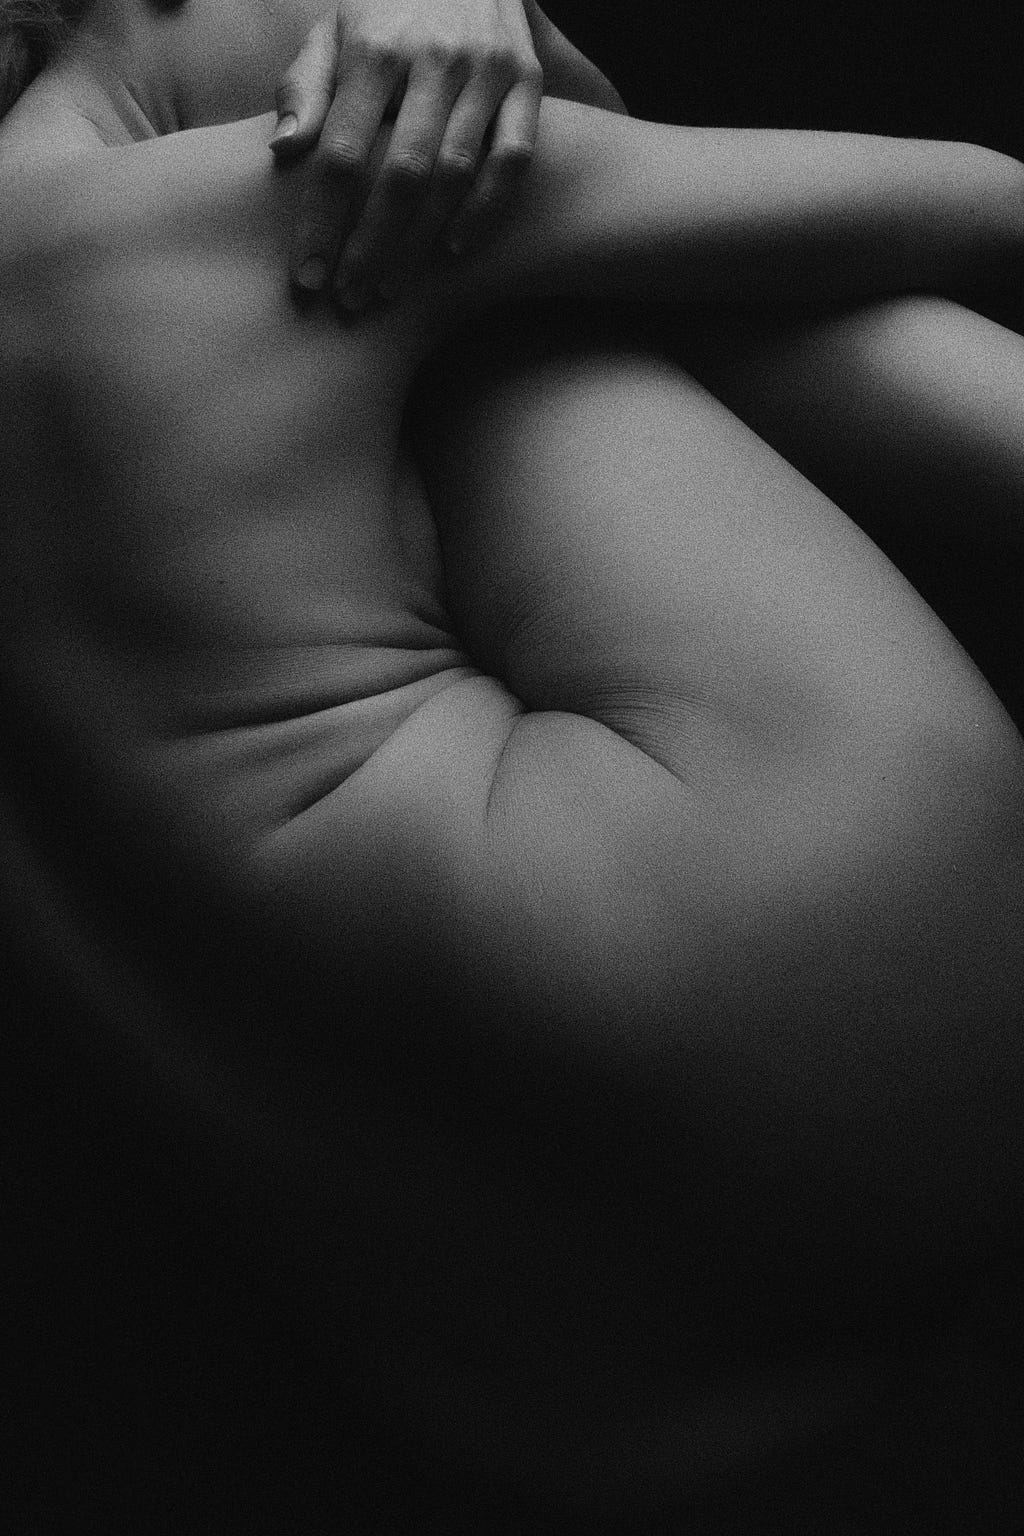 A black-and-white image of a woman’s torso and upper leg. The photograph is taken from a back and side profile perspective. The focus of the image is the folds on the woman’s body.